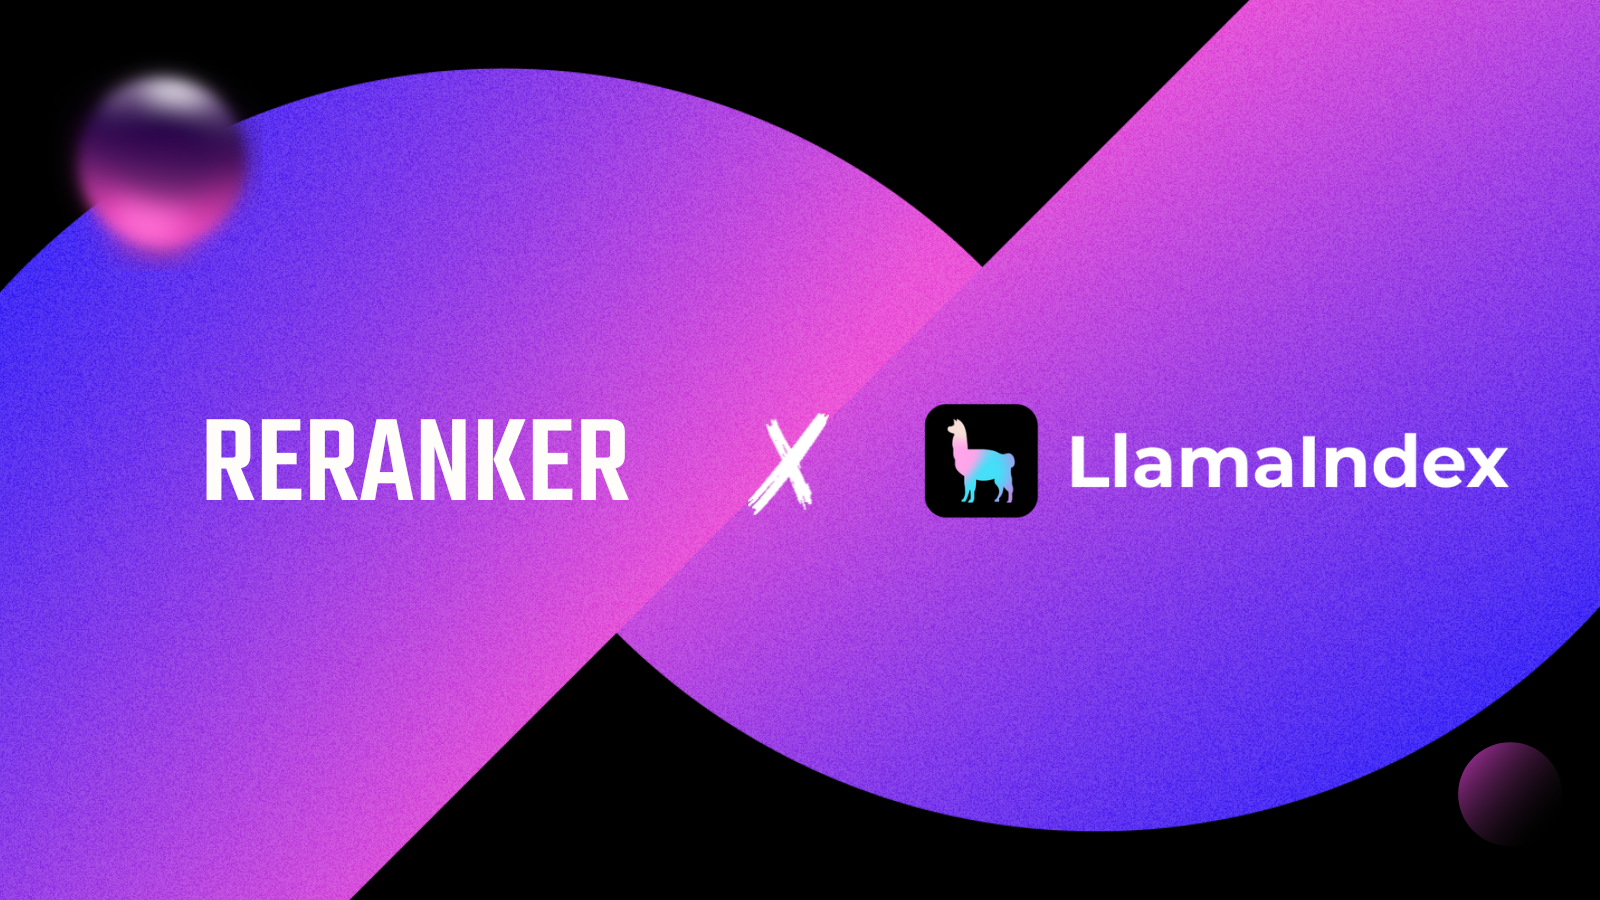 Collaborative graphic with "RERANKER" and "Llamalindex" logos over a purple background with crossed white abstract lines.